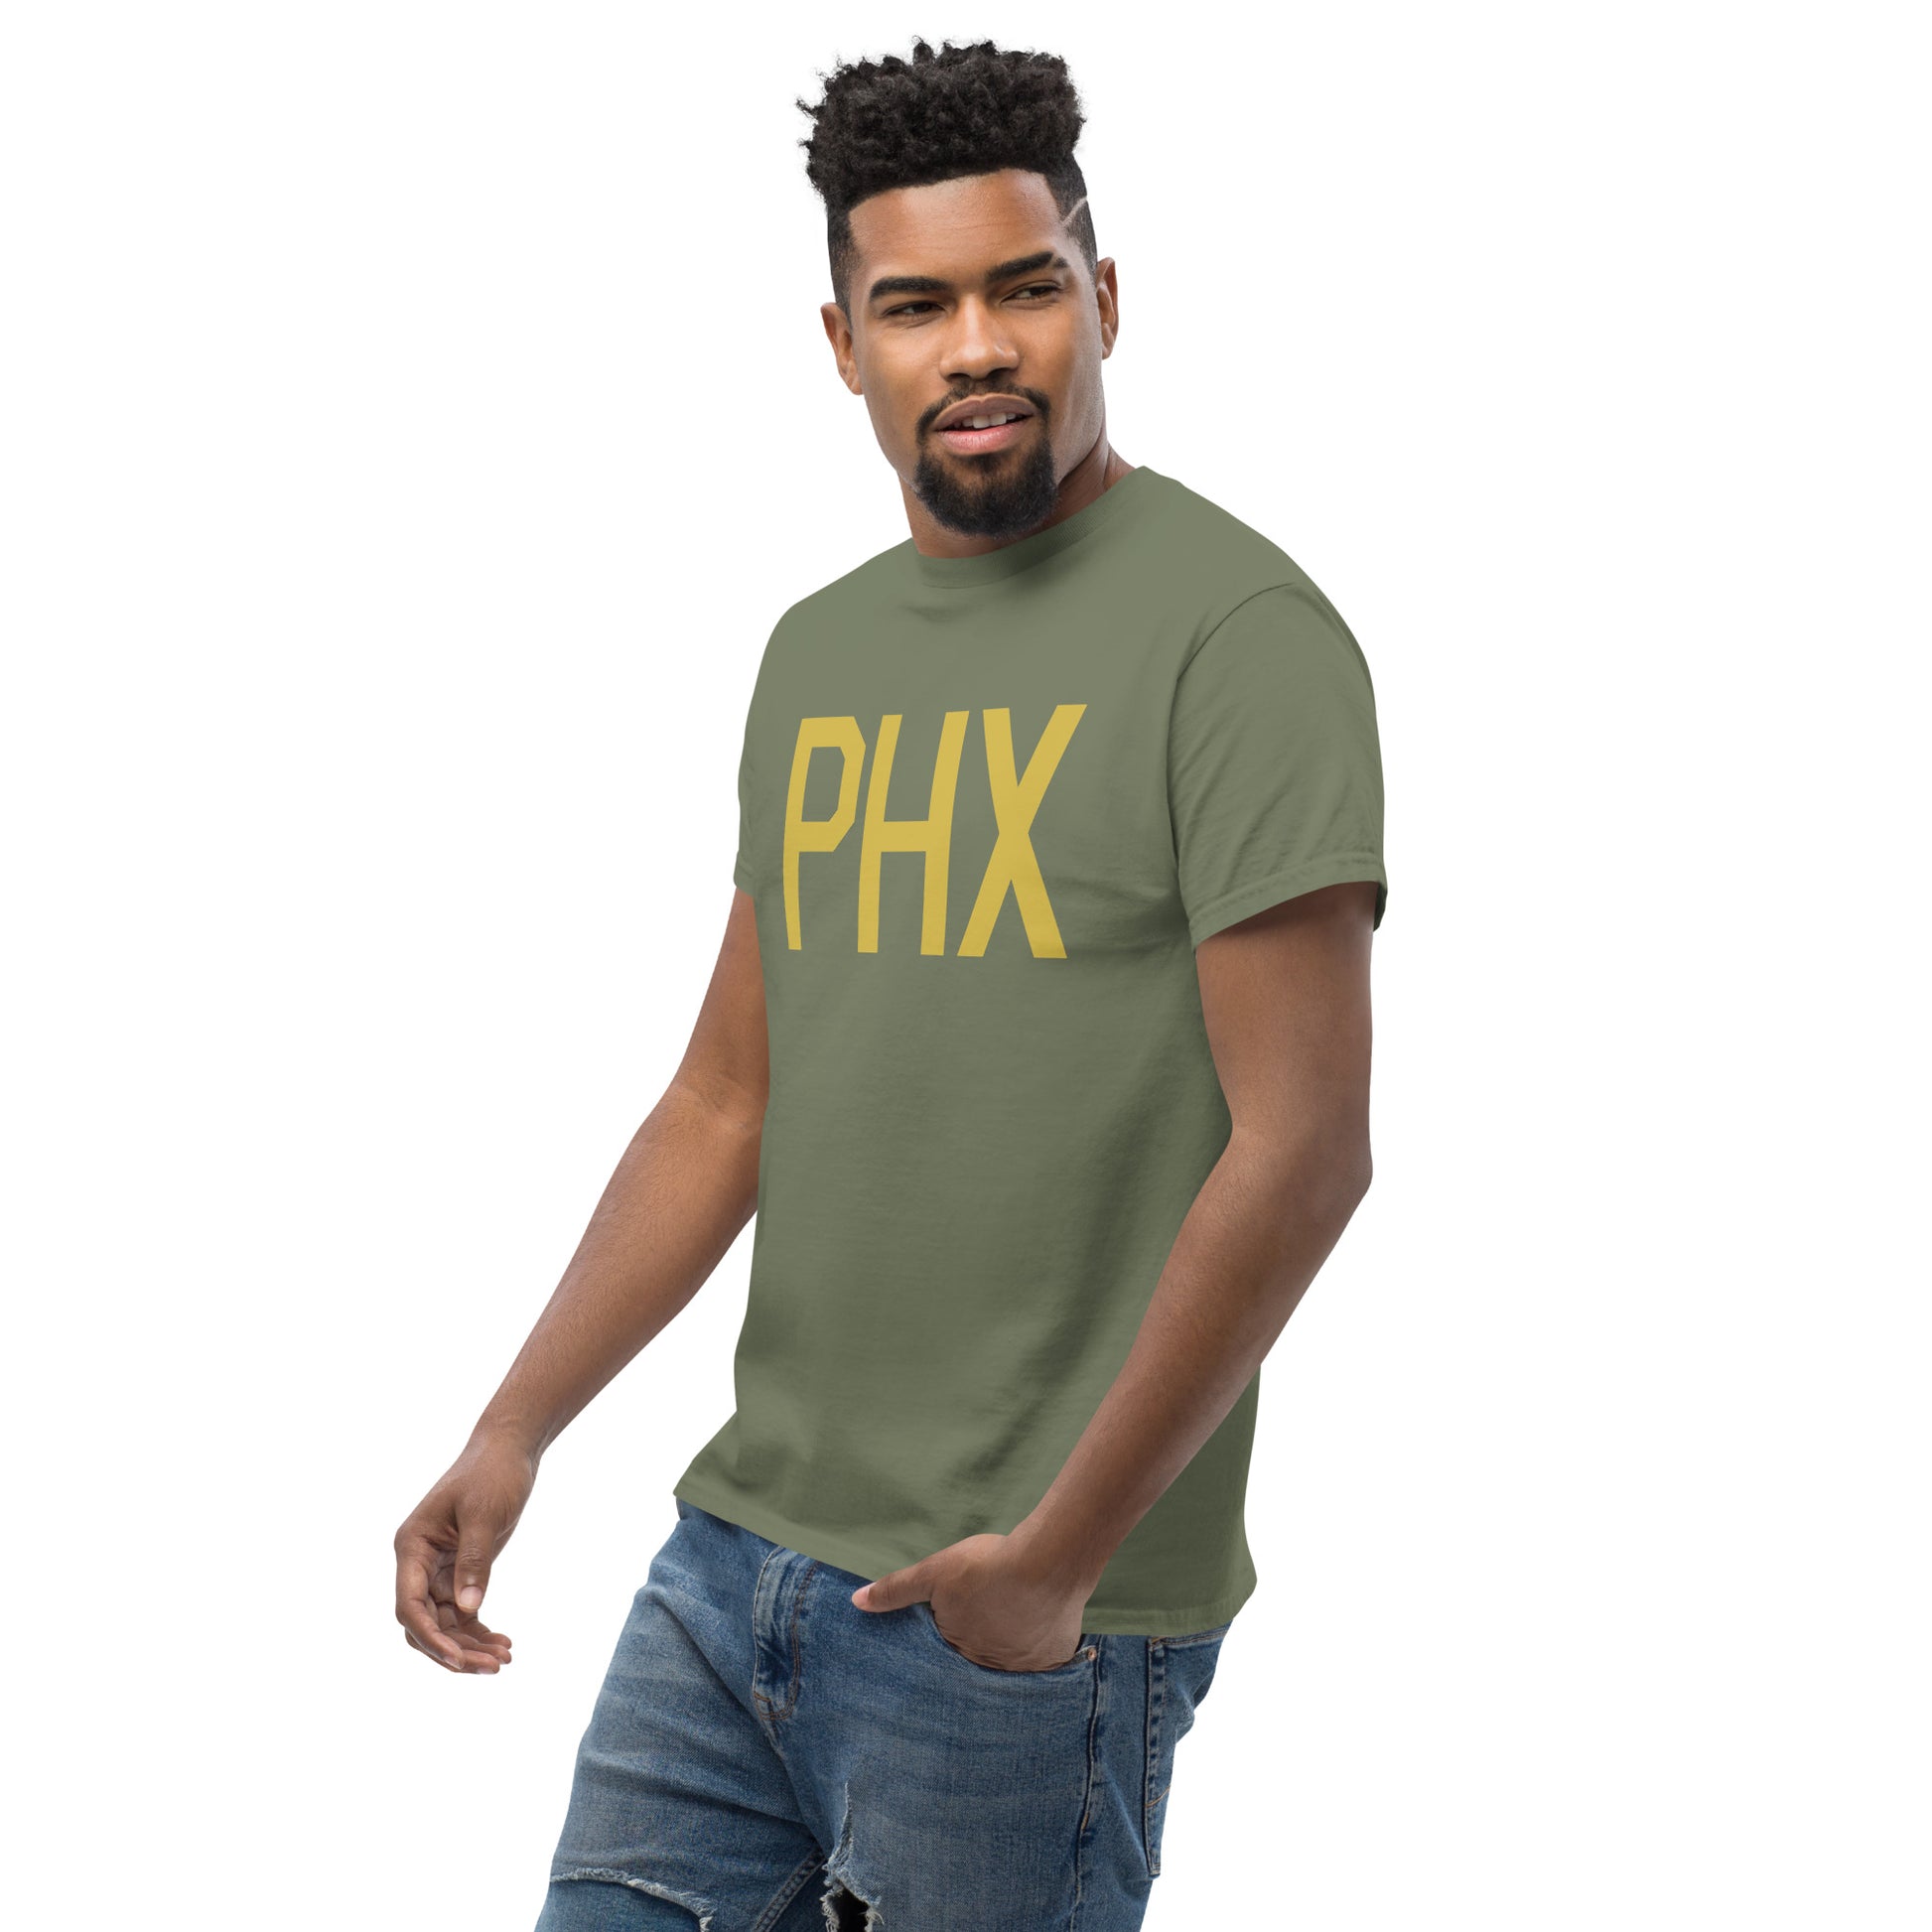 Aviation Enthusiast Men's Tee - Old Gold Graphic • PHX Phoenix • YHM Designs - Image 07